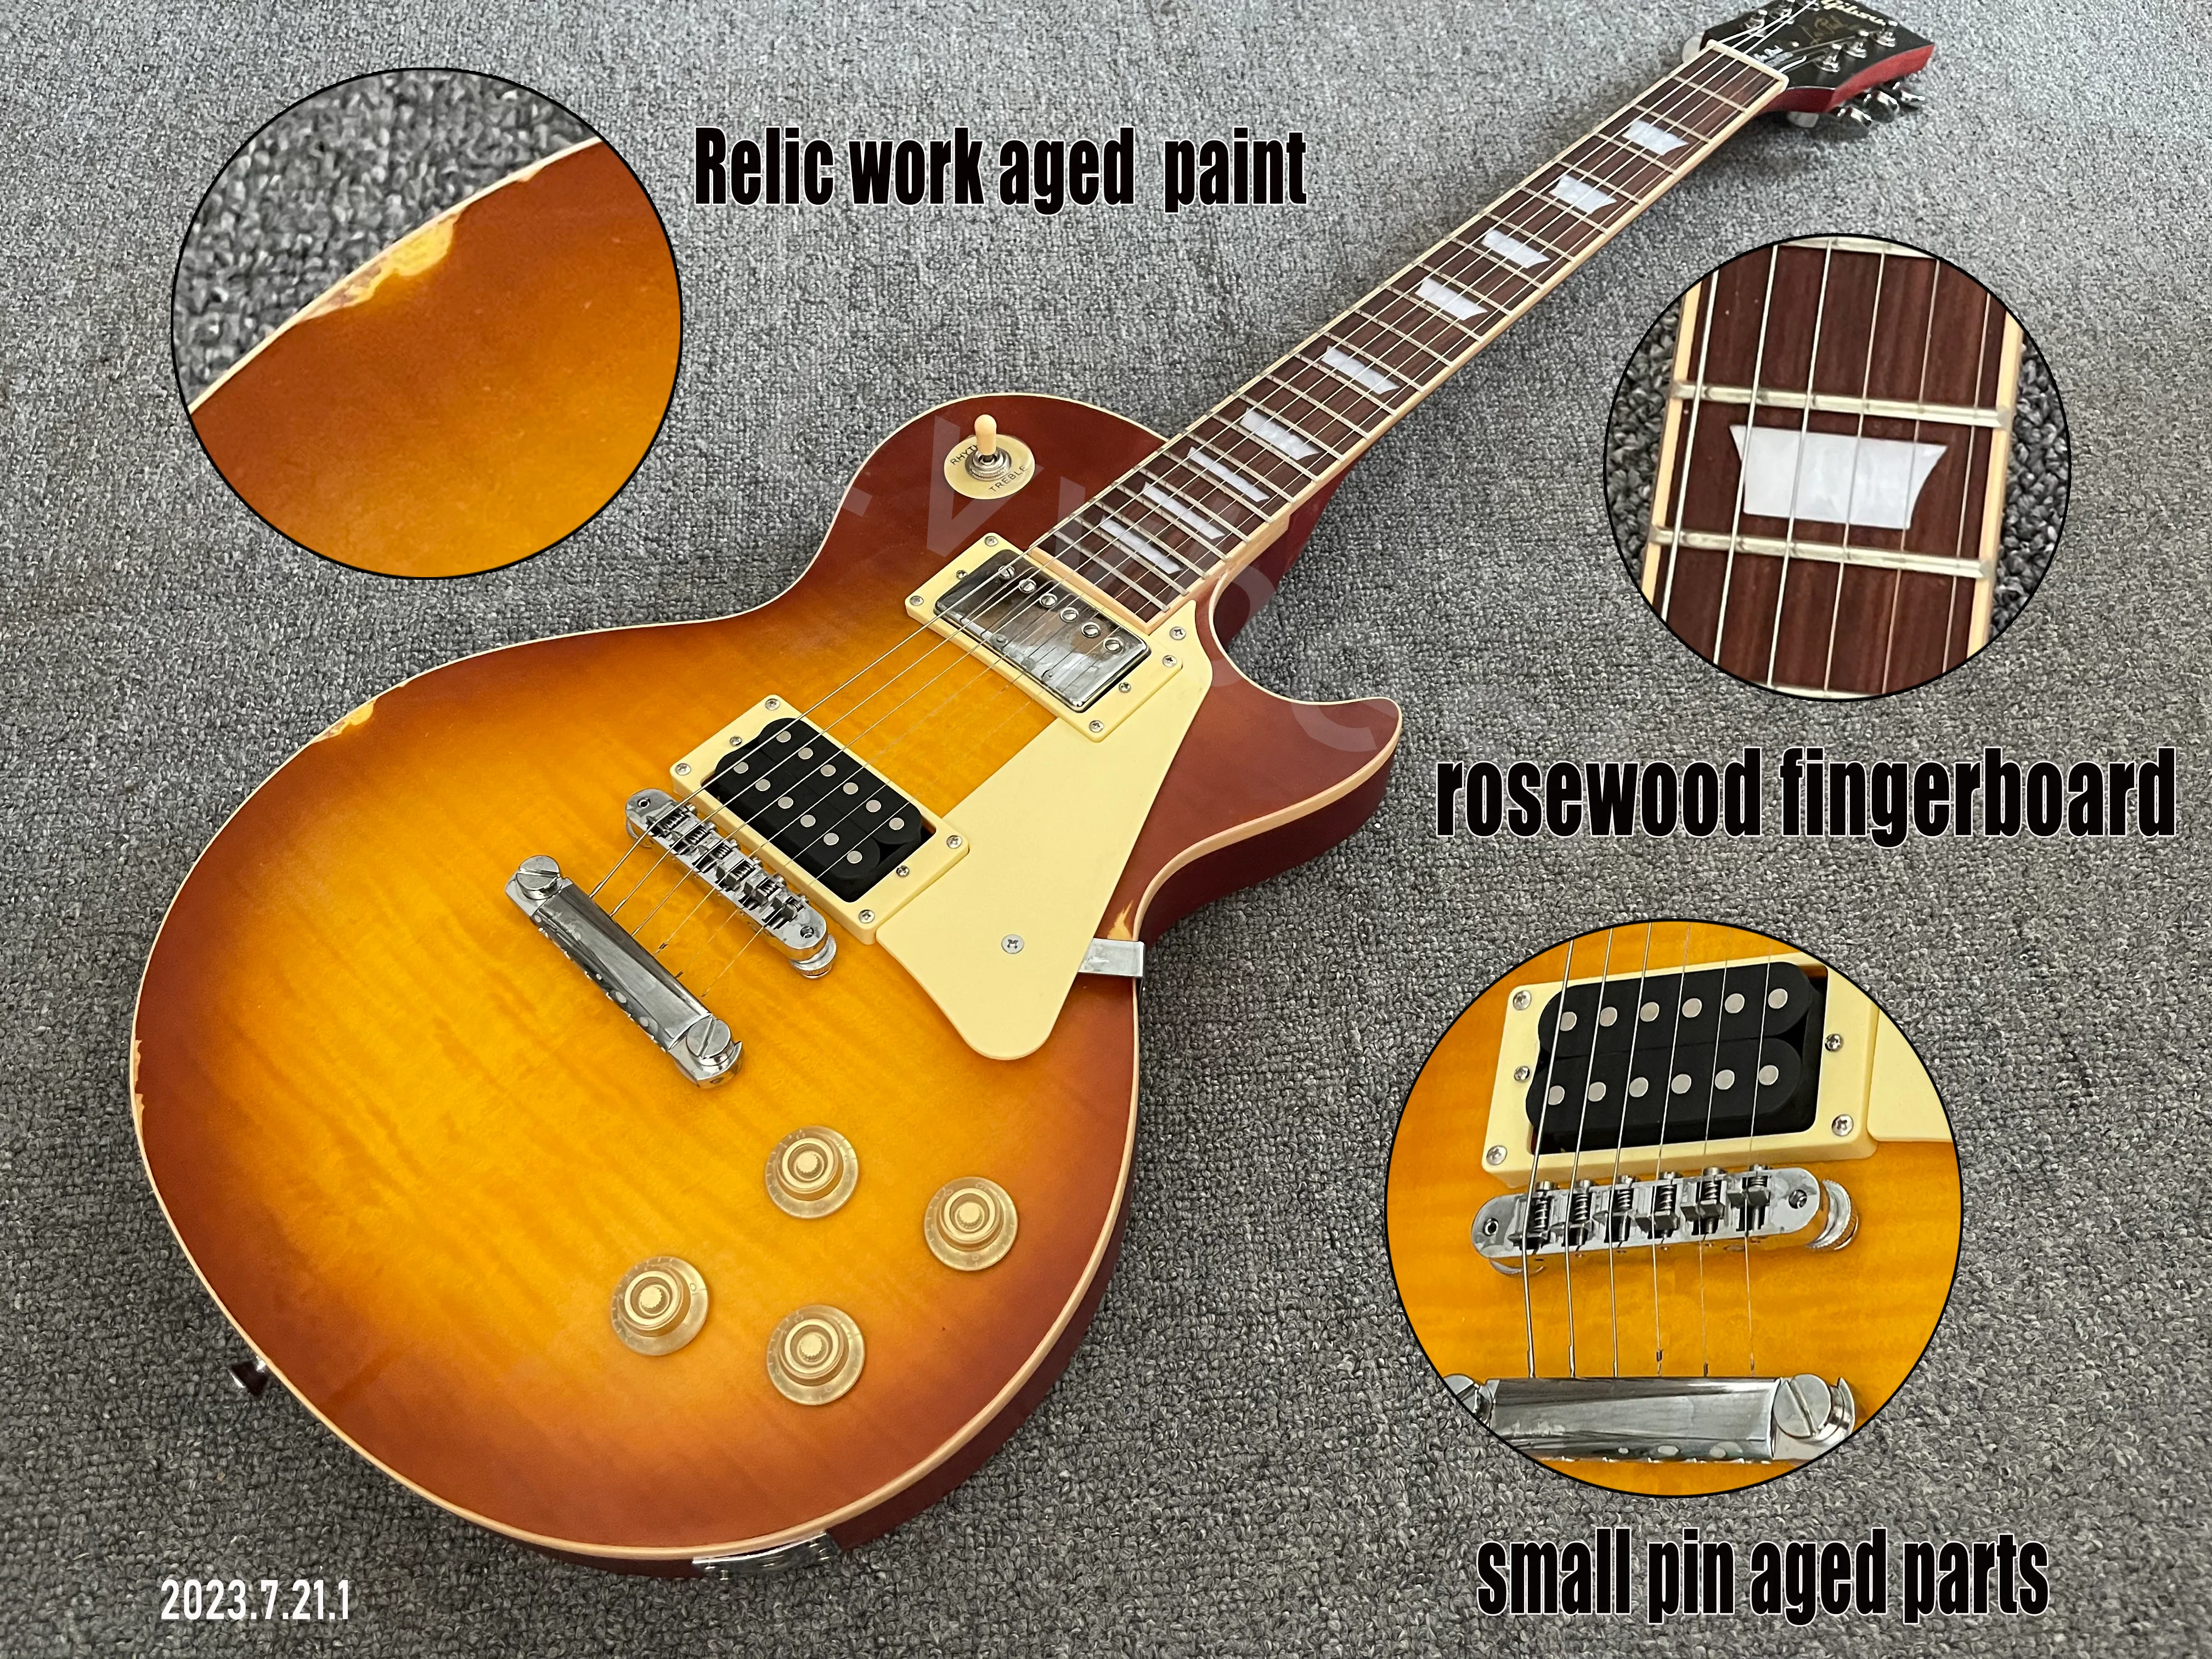 Electric guitar Jimmy page model relic honey burst paint and aged parts small pin bridge bone nut rich flame top